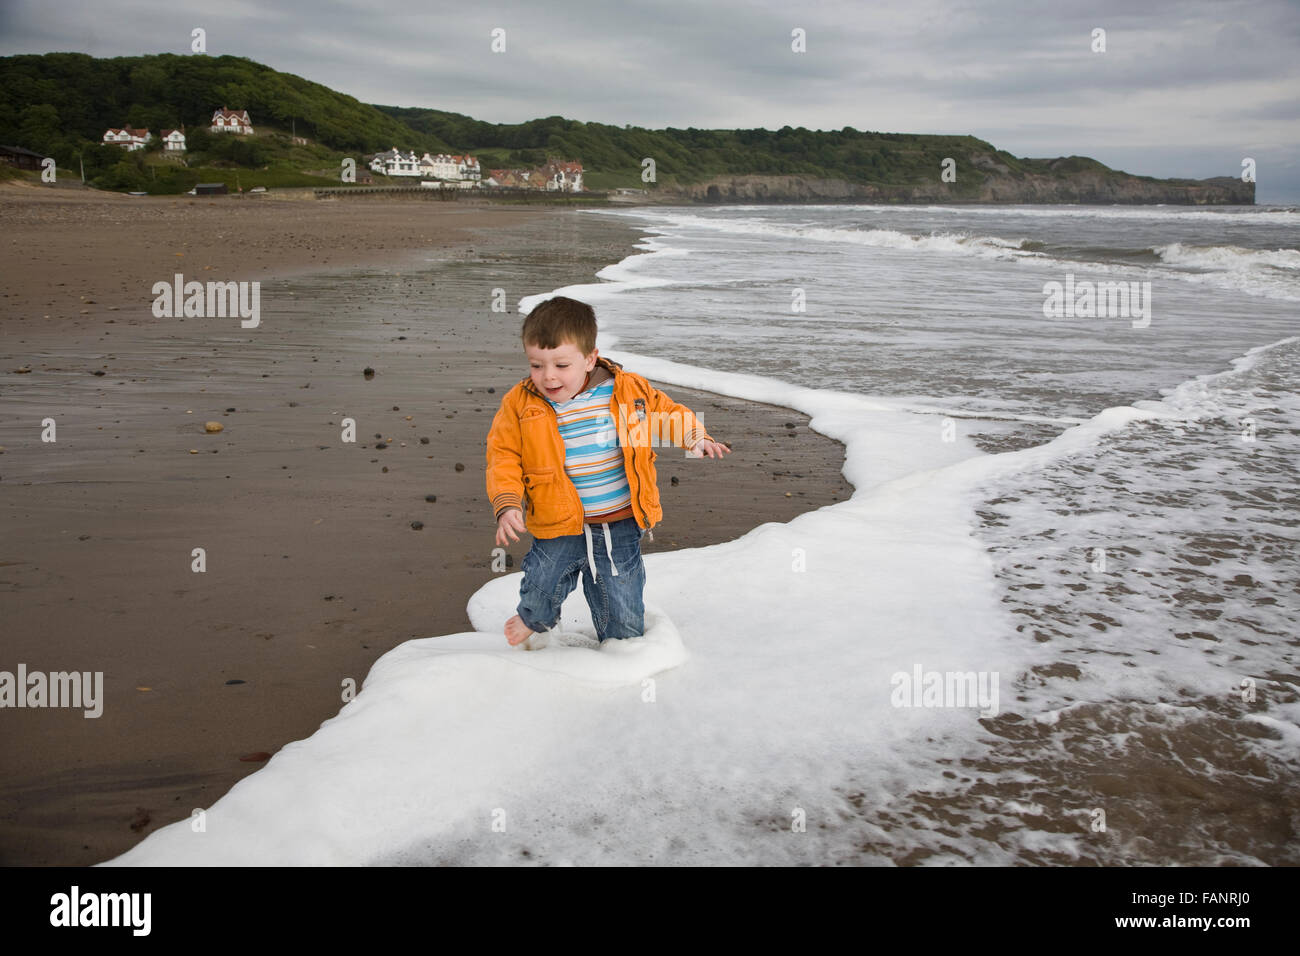 A young boy playing on the beach at Saltburn, Yorkshire. Stock Photo